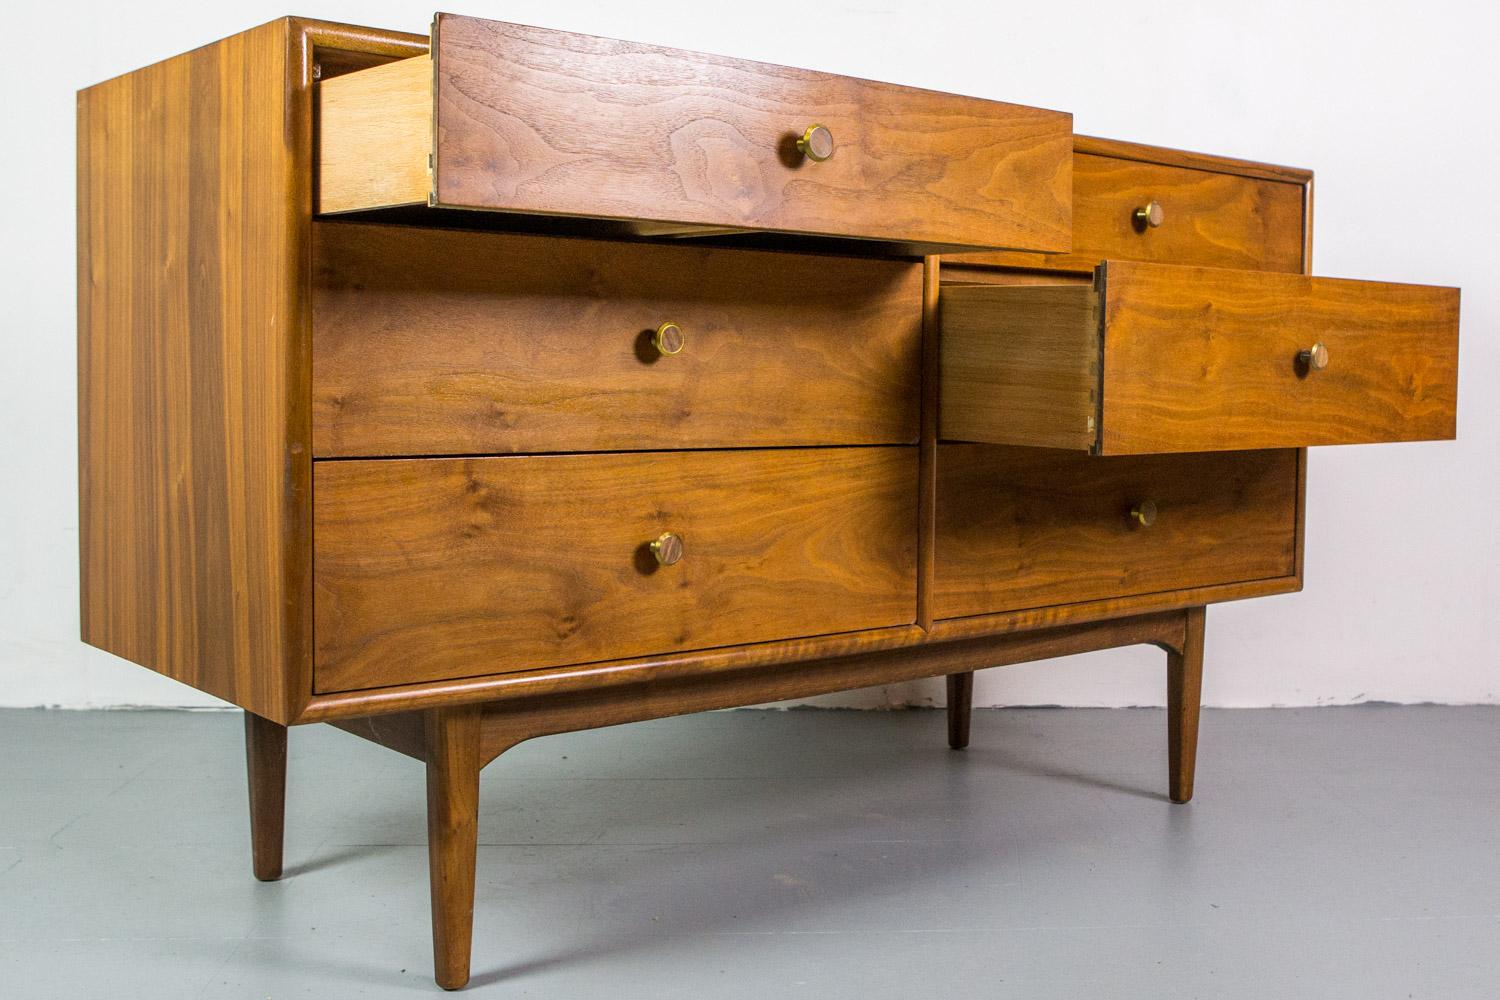 Mid-Century Modern six-drawer dresser by Kipp Stewart for Drexel. Superior quality and construction in nice figured walnut.